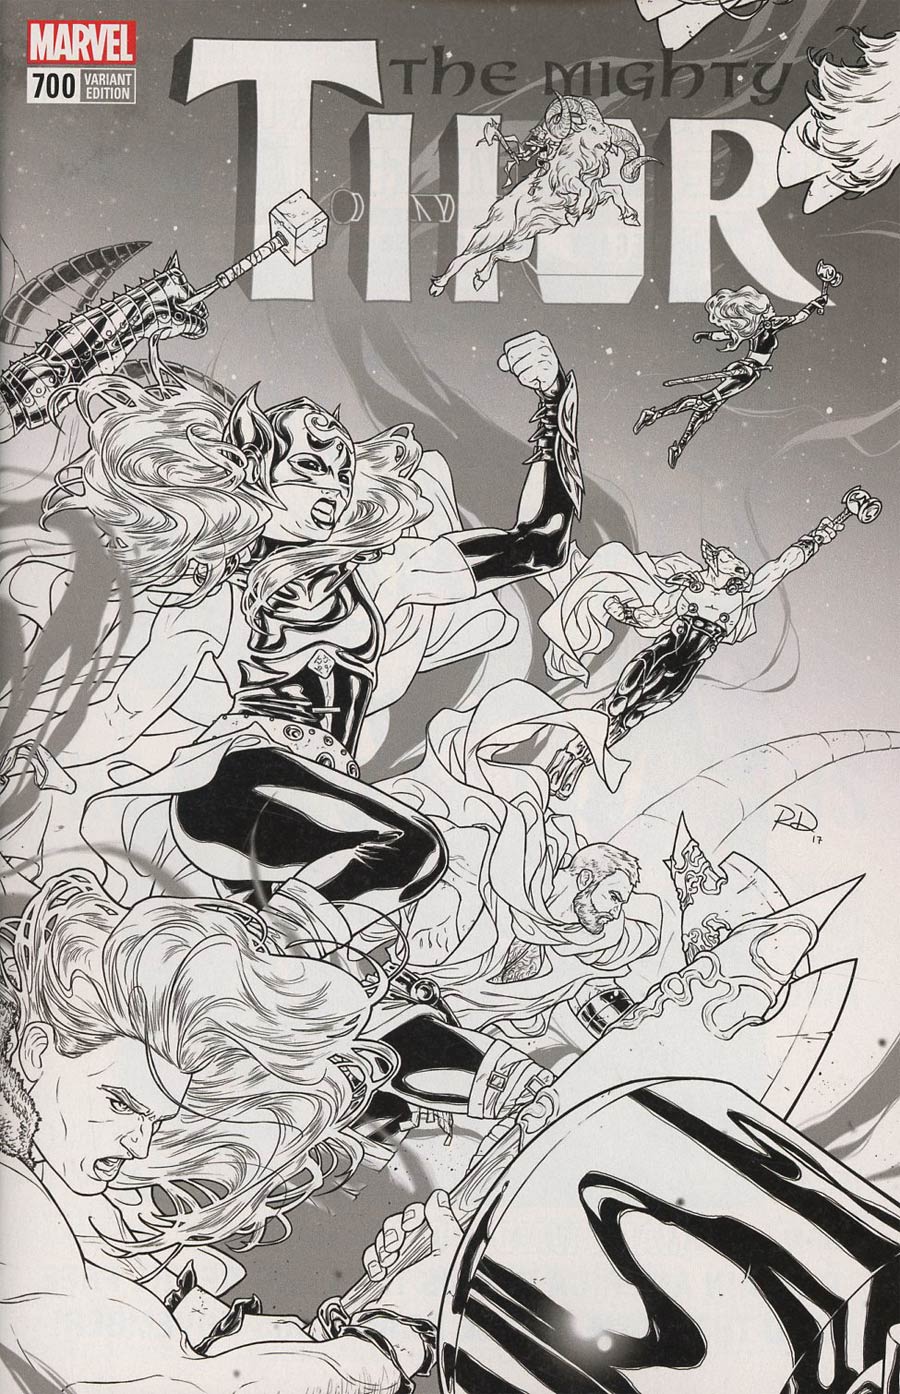 Mighty Thor Vol 2 #700 Cover I Incentive Russell Dauterman Wraparound Black & White Cover (Marvel Legacy Tie-In)